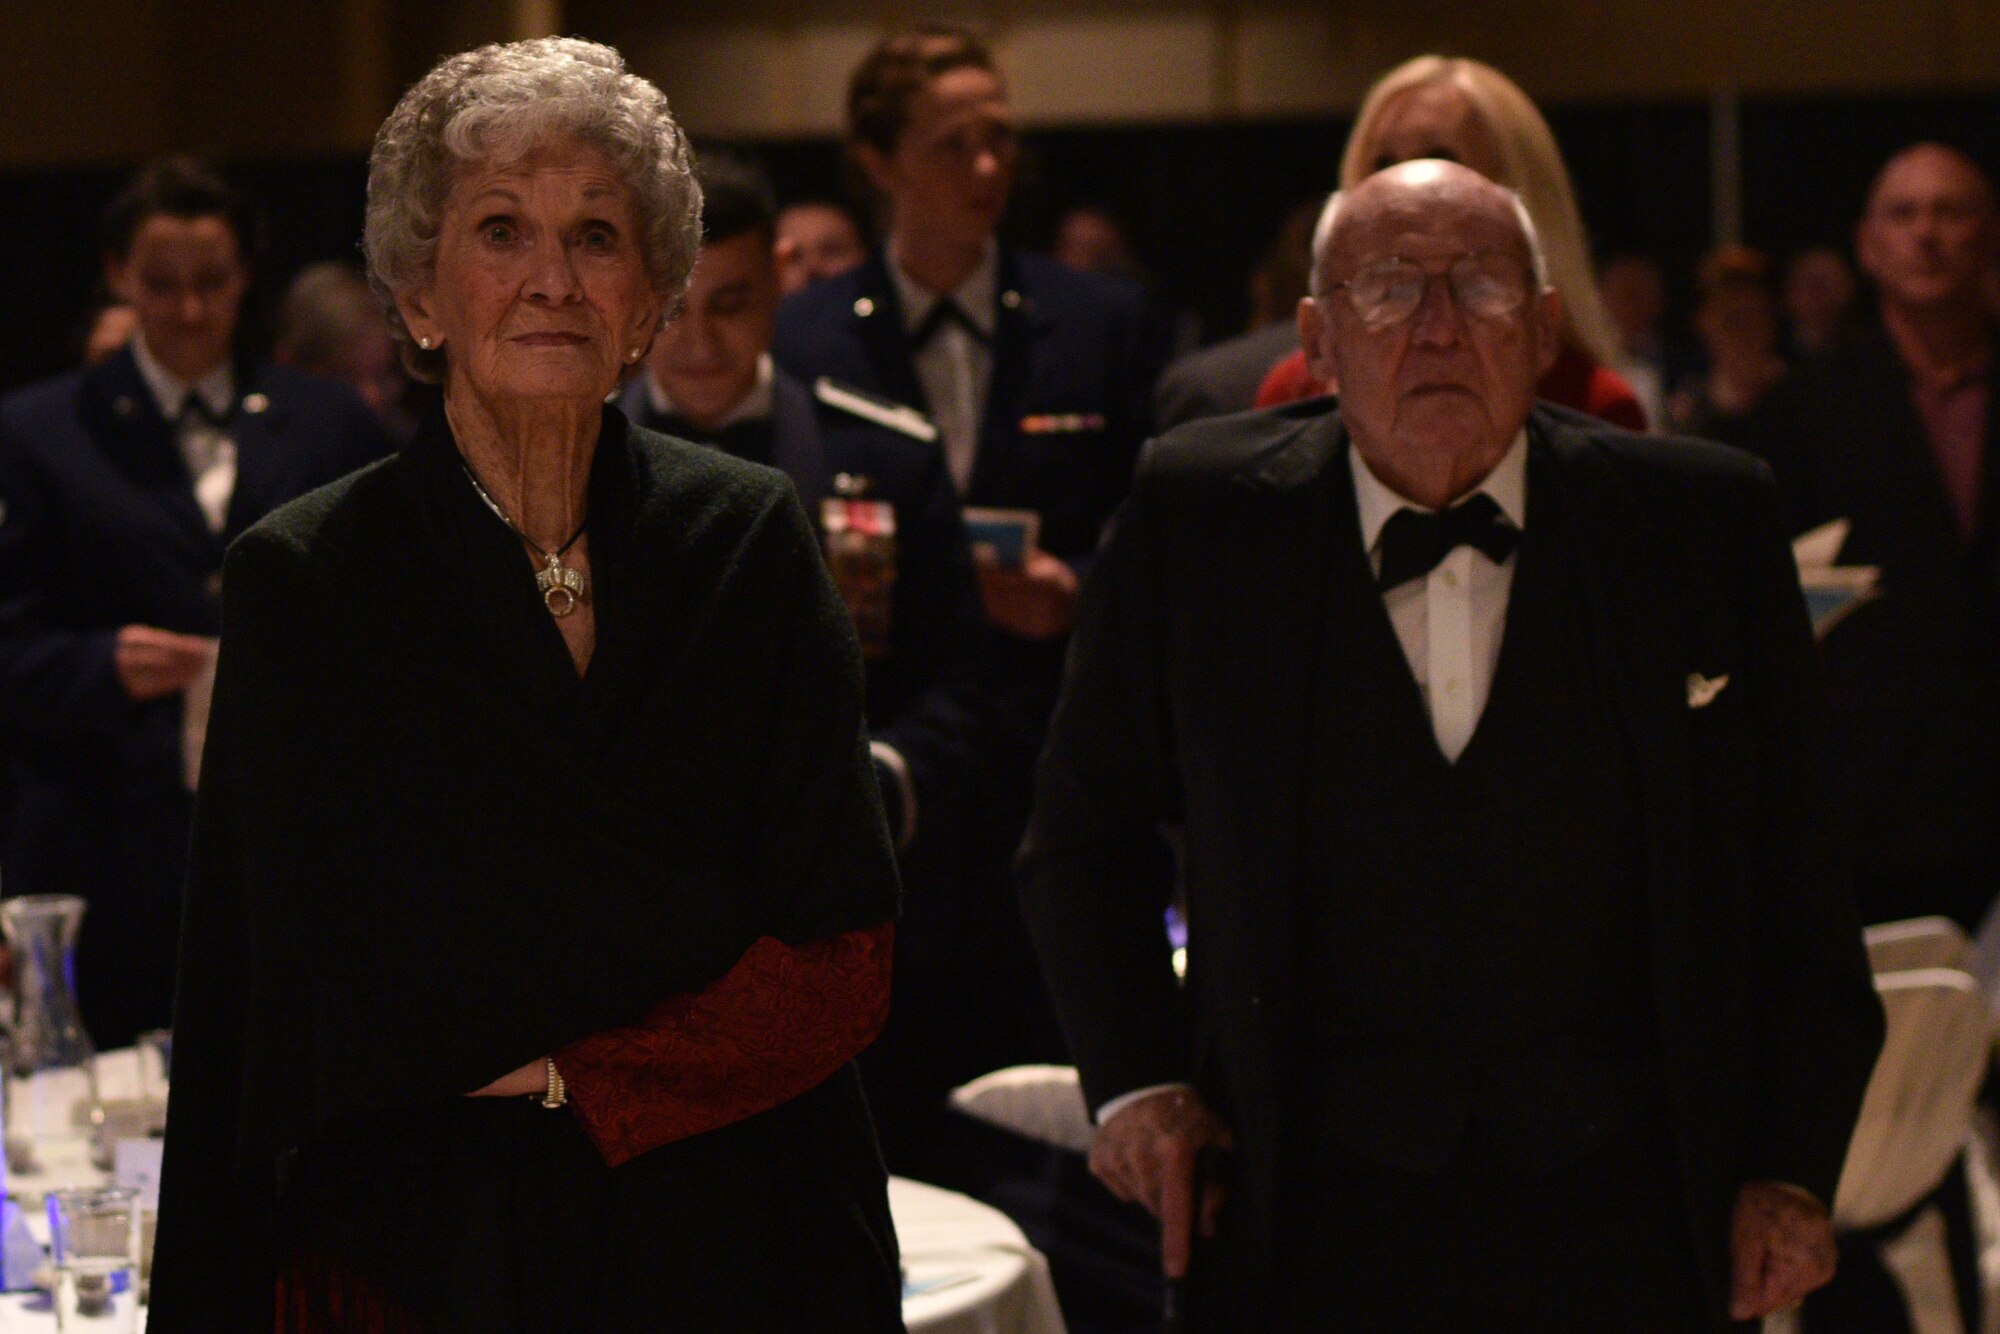 JoAnne Powell and U.S. Air Force retired Col. Charles Powell stand during the 25th Annual Awards Ceremony at the McNeese Convention Center in San Angelo, Texas, Feb. 9, 2018. The Powells have been community leaders for over 30 years after he retired as Goodfellow’s commander in 1984. (U.S. Air Force photo by Senior Airman Randall Moose)